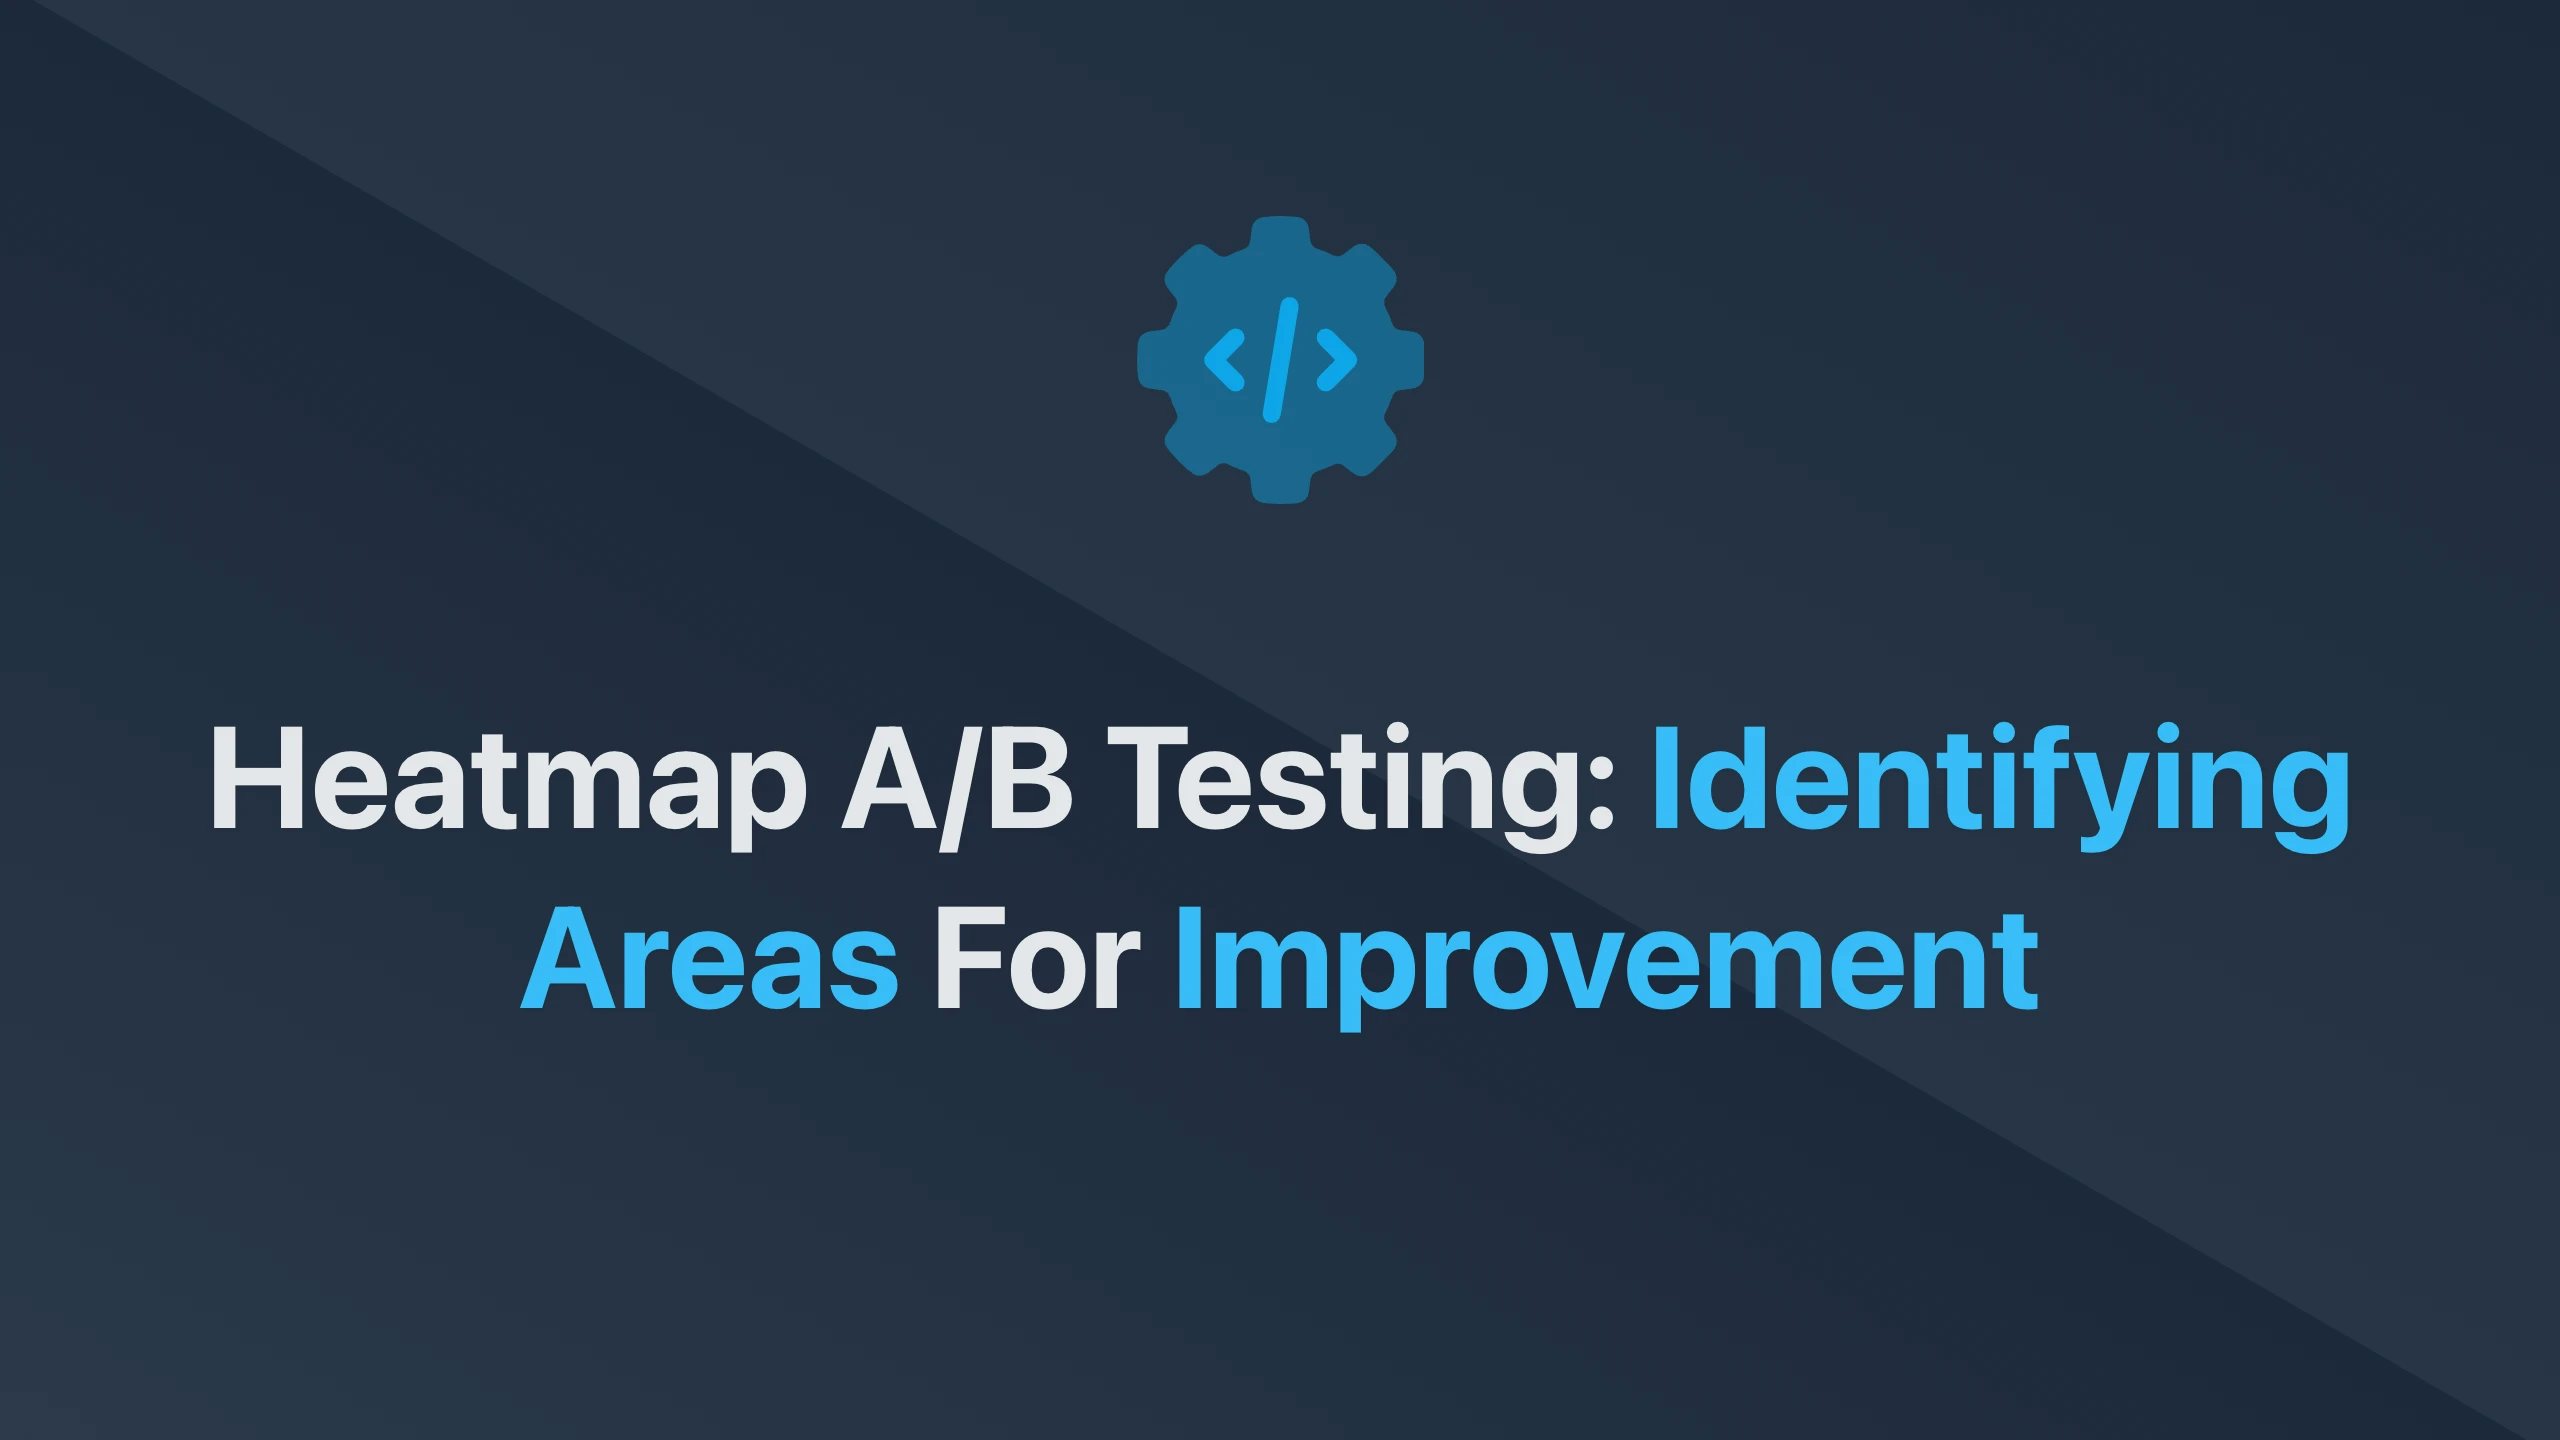 Cover Image for Heatmap A/B Testing: Identifying Areas for Improvement